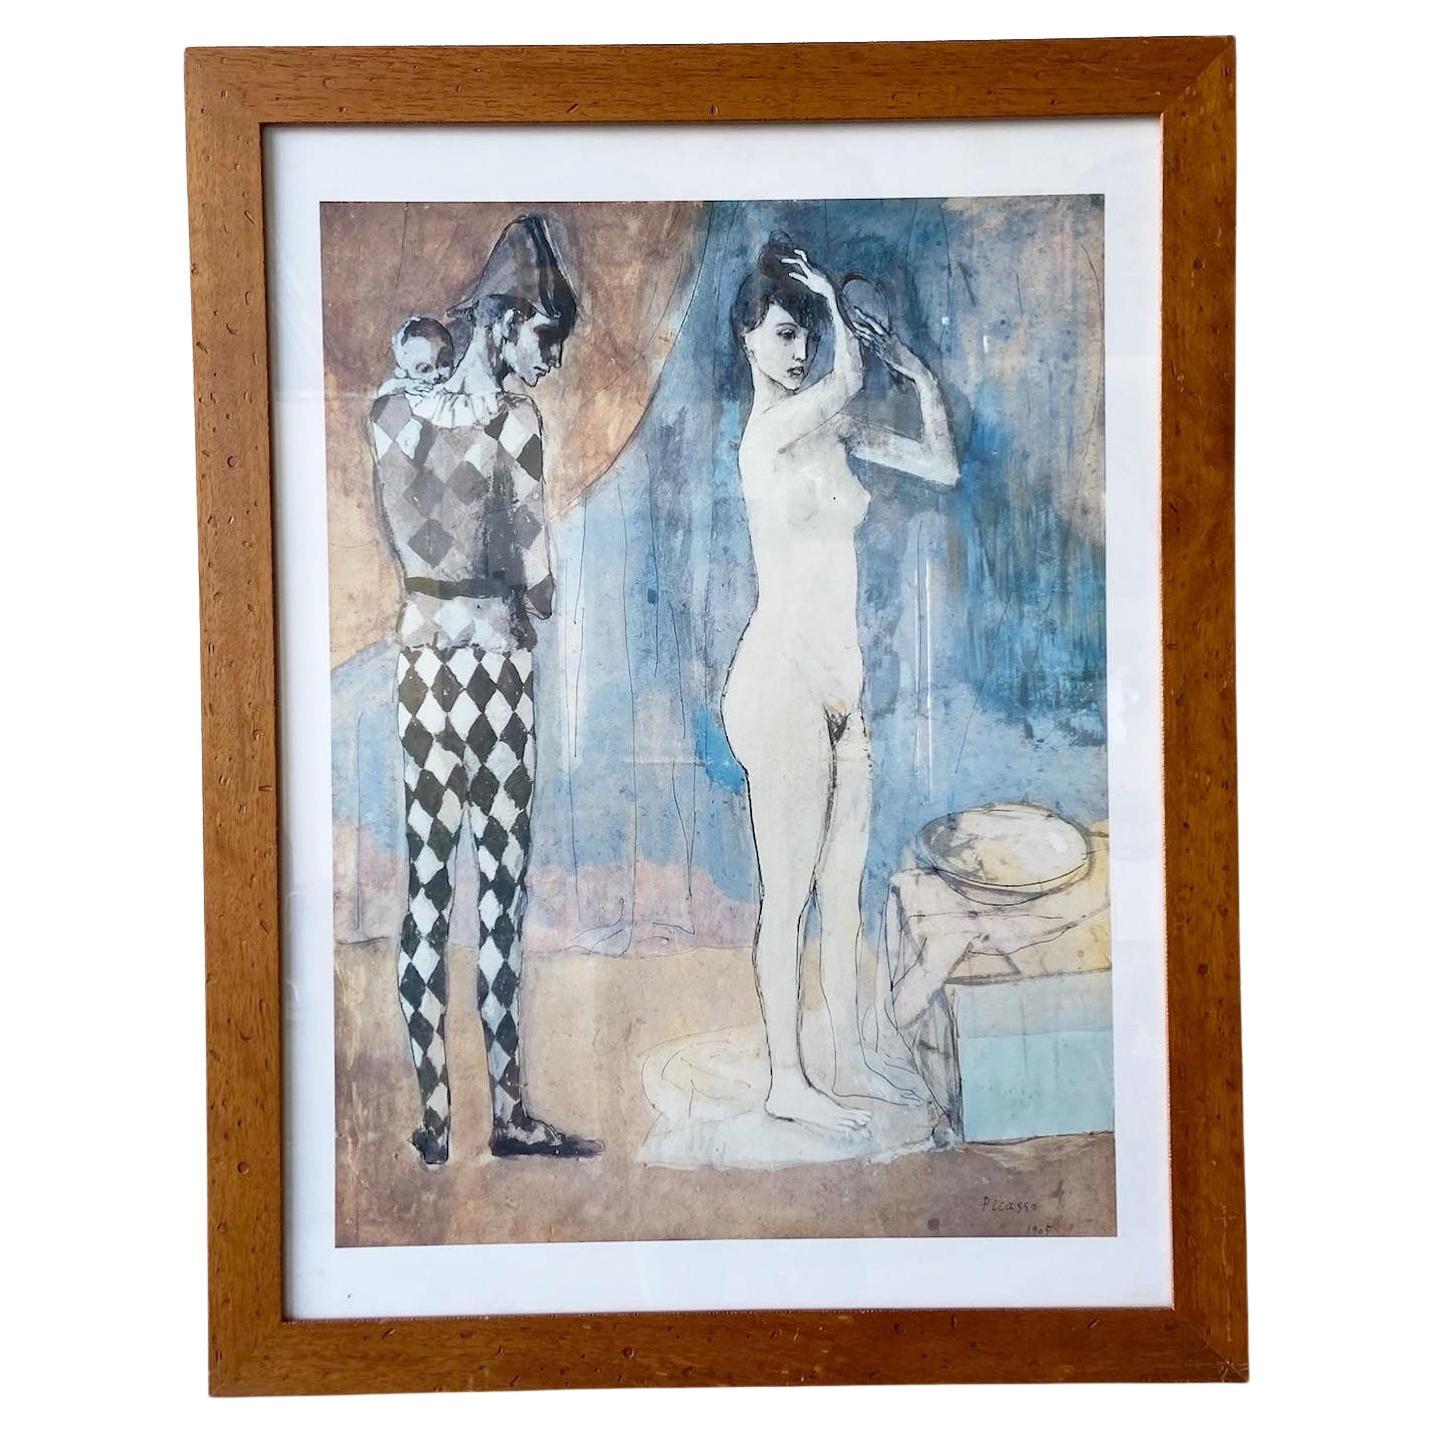 Vintage Framed Print Titled Harlequin’s Family by Picasso